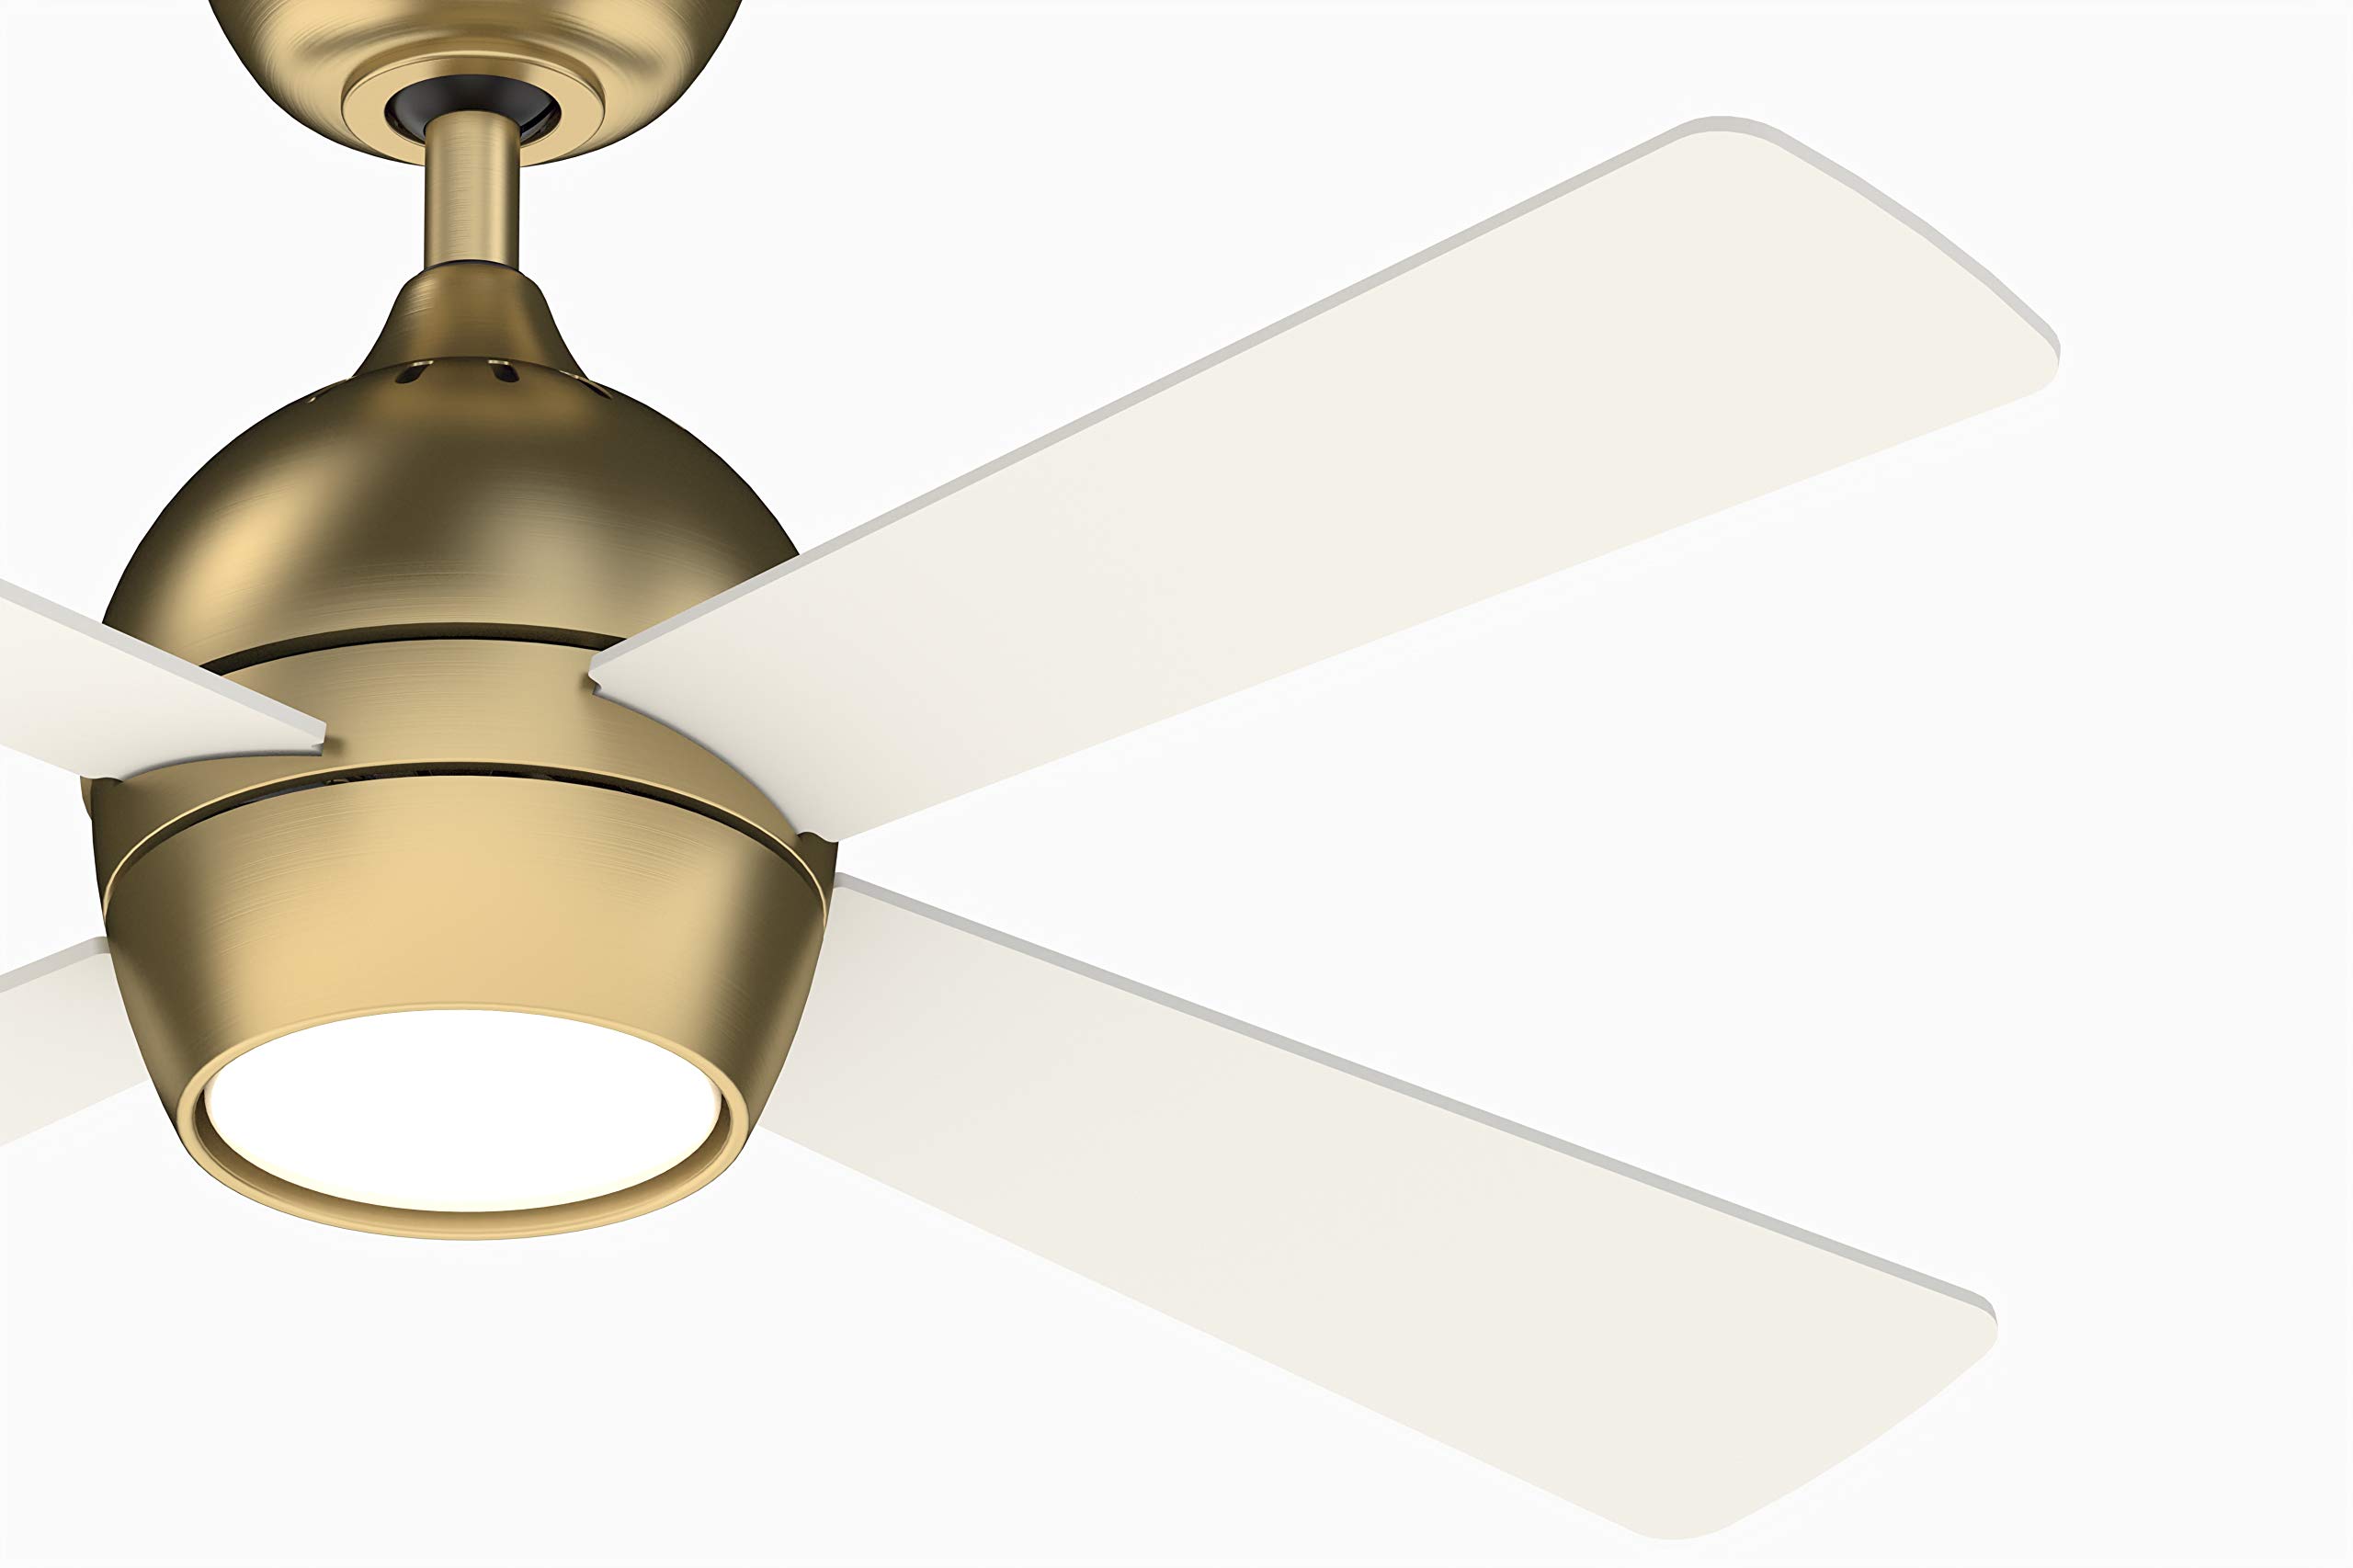 Fanimation Kwad 44 inch Indoor Ceiling Fan with LED Light Kit, Brushed Satin Brass